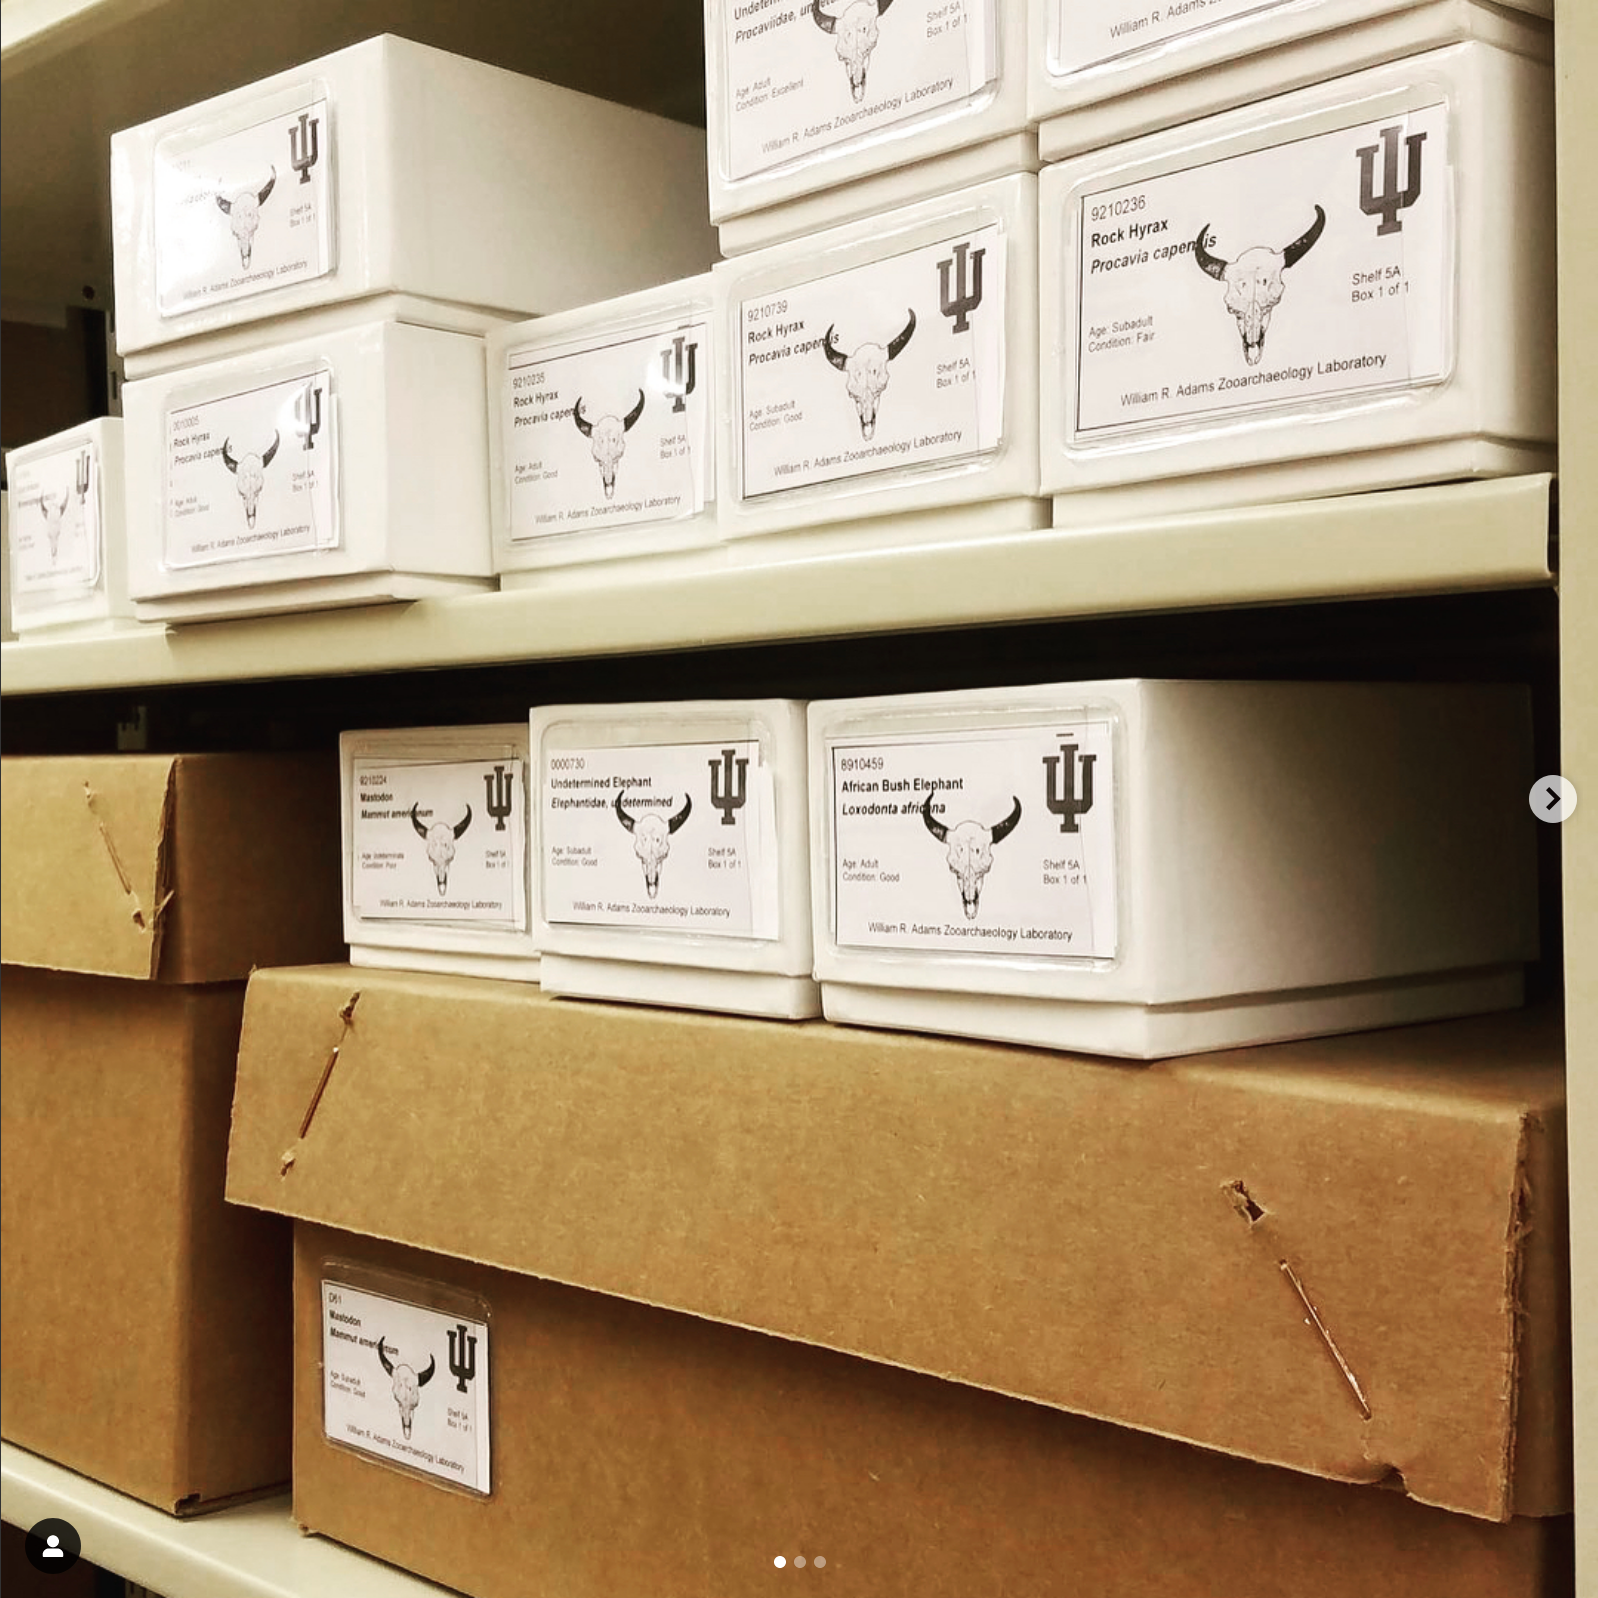 Archival quality boxes with large labels